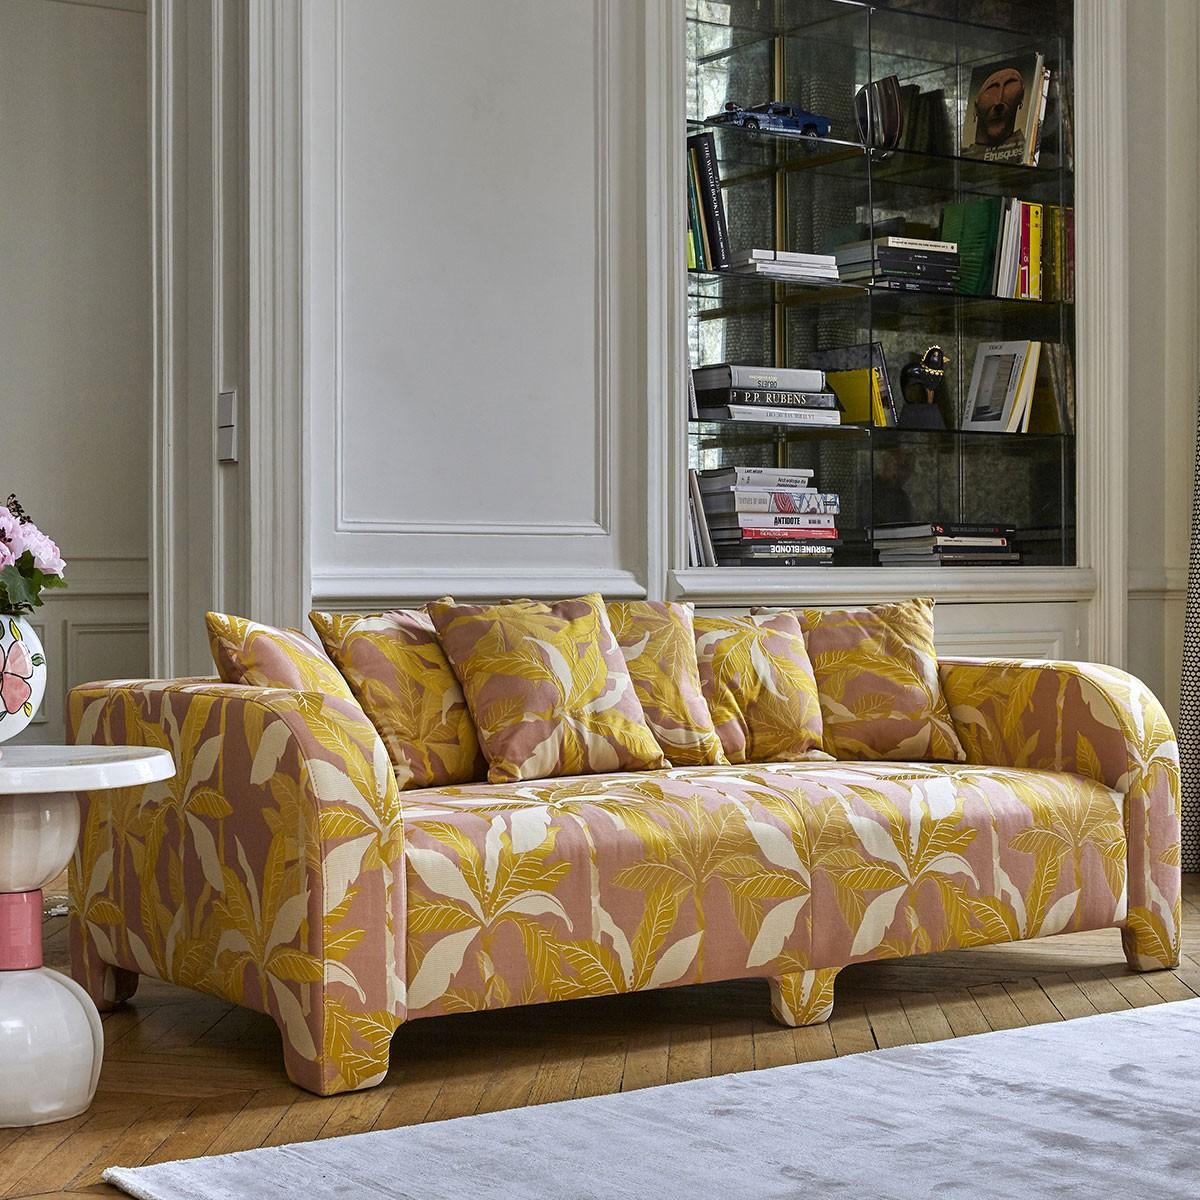 Popus Editions Graziella 4 Seater Sofa in Amber Athena Loop Yarn Upholstery In New Condition For Sale In Paris, FR